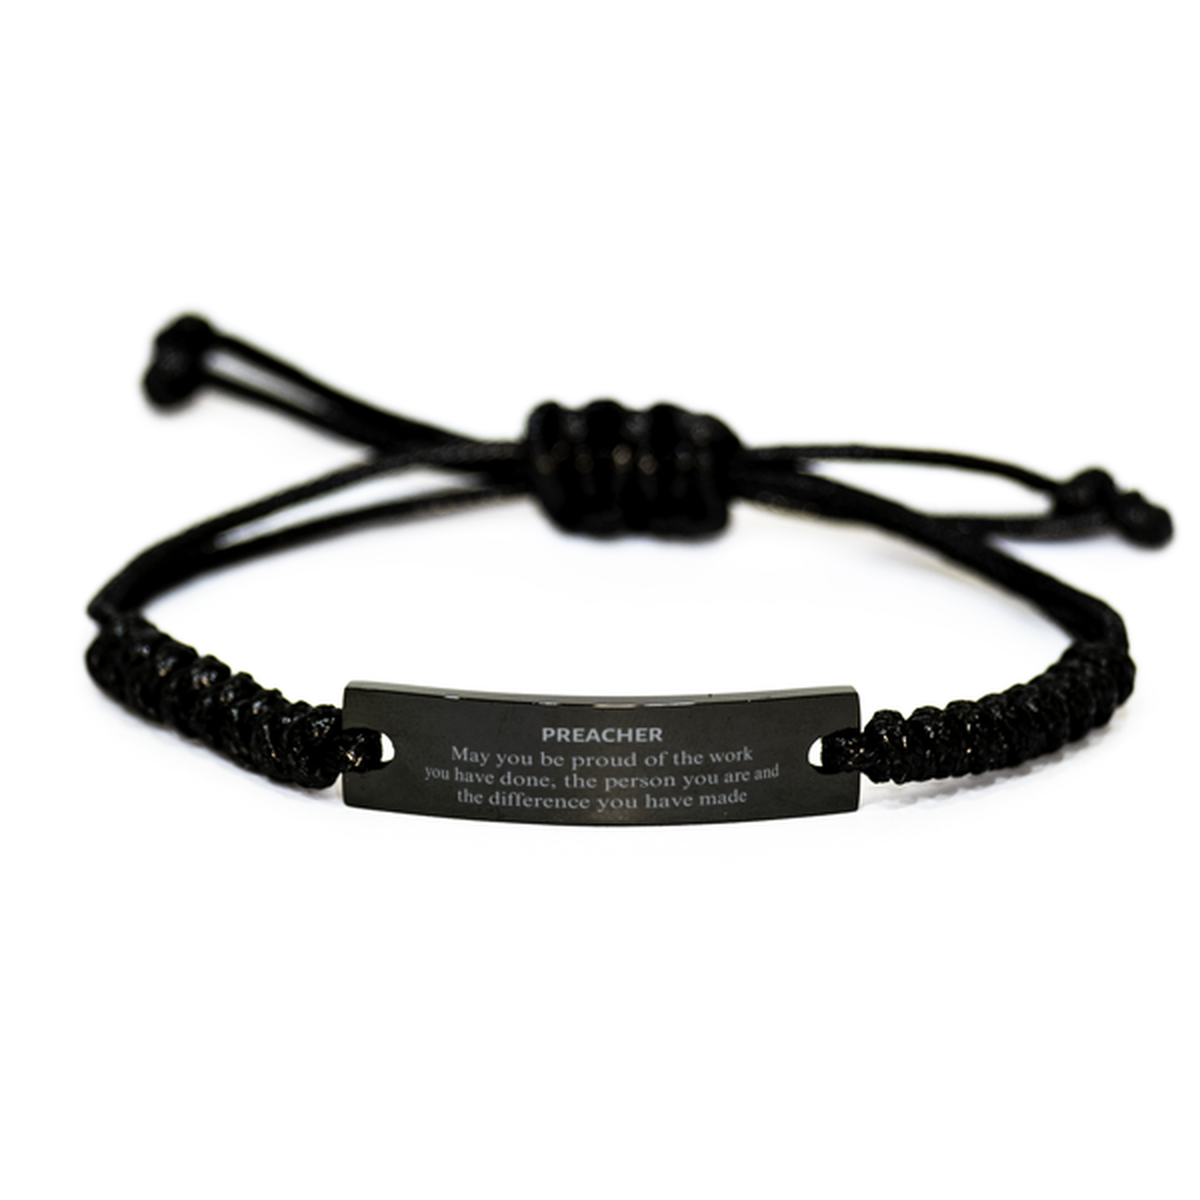 Preacher May you be proud of the work you have done, Retirement Preacher Black Rope Bracelet for Colleague Appreciation Gifts Amazing for Preacher